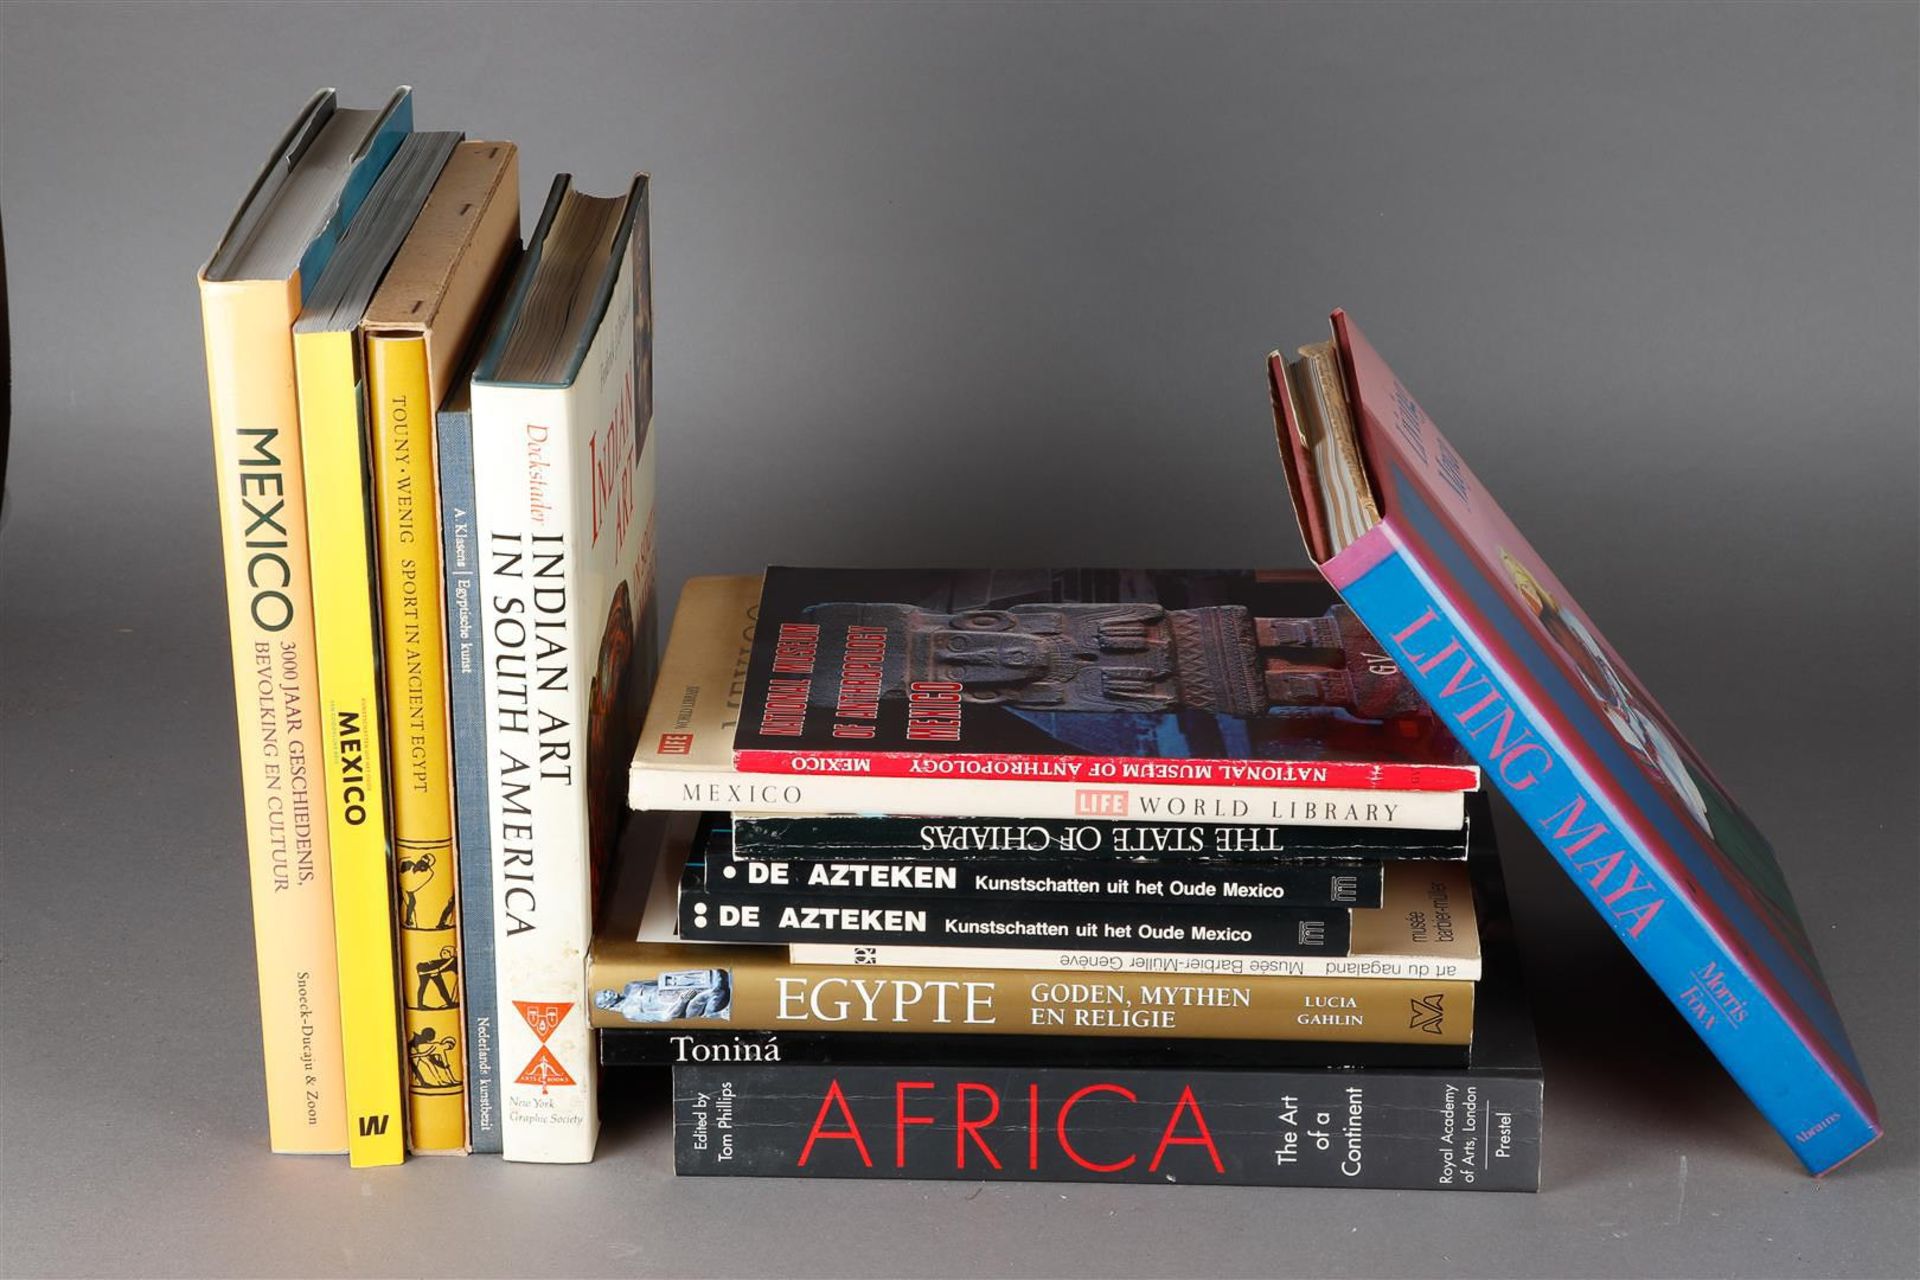 A collection of books on South American art and culture, Egypt and Africa.